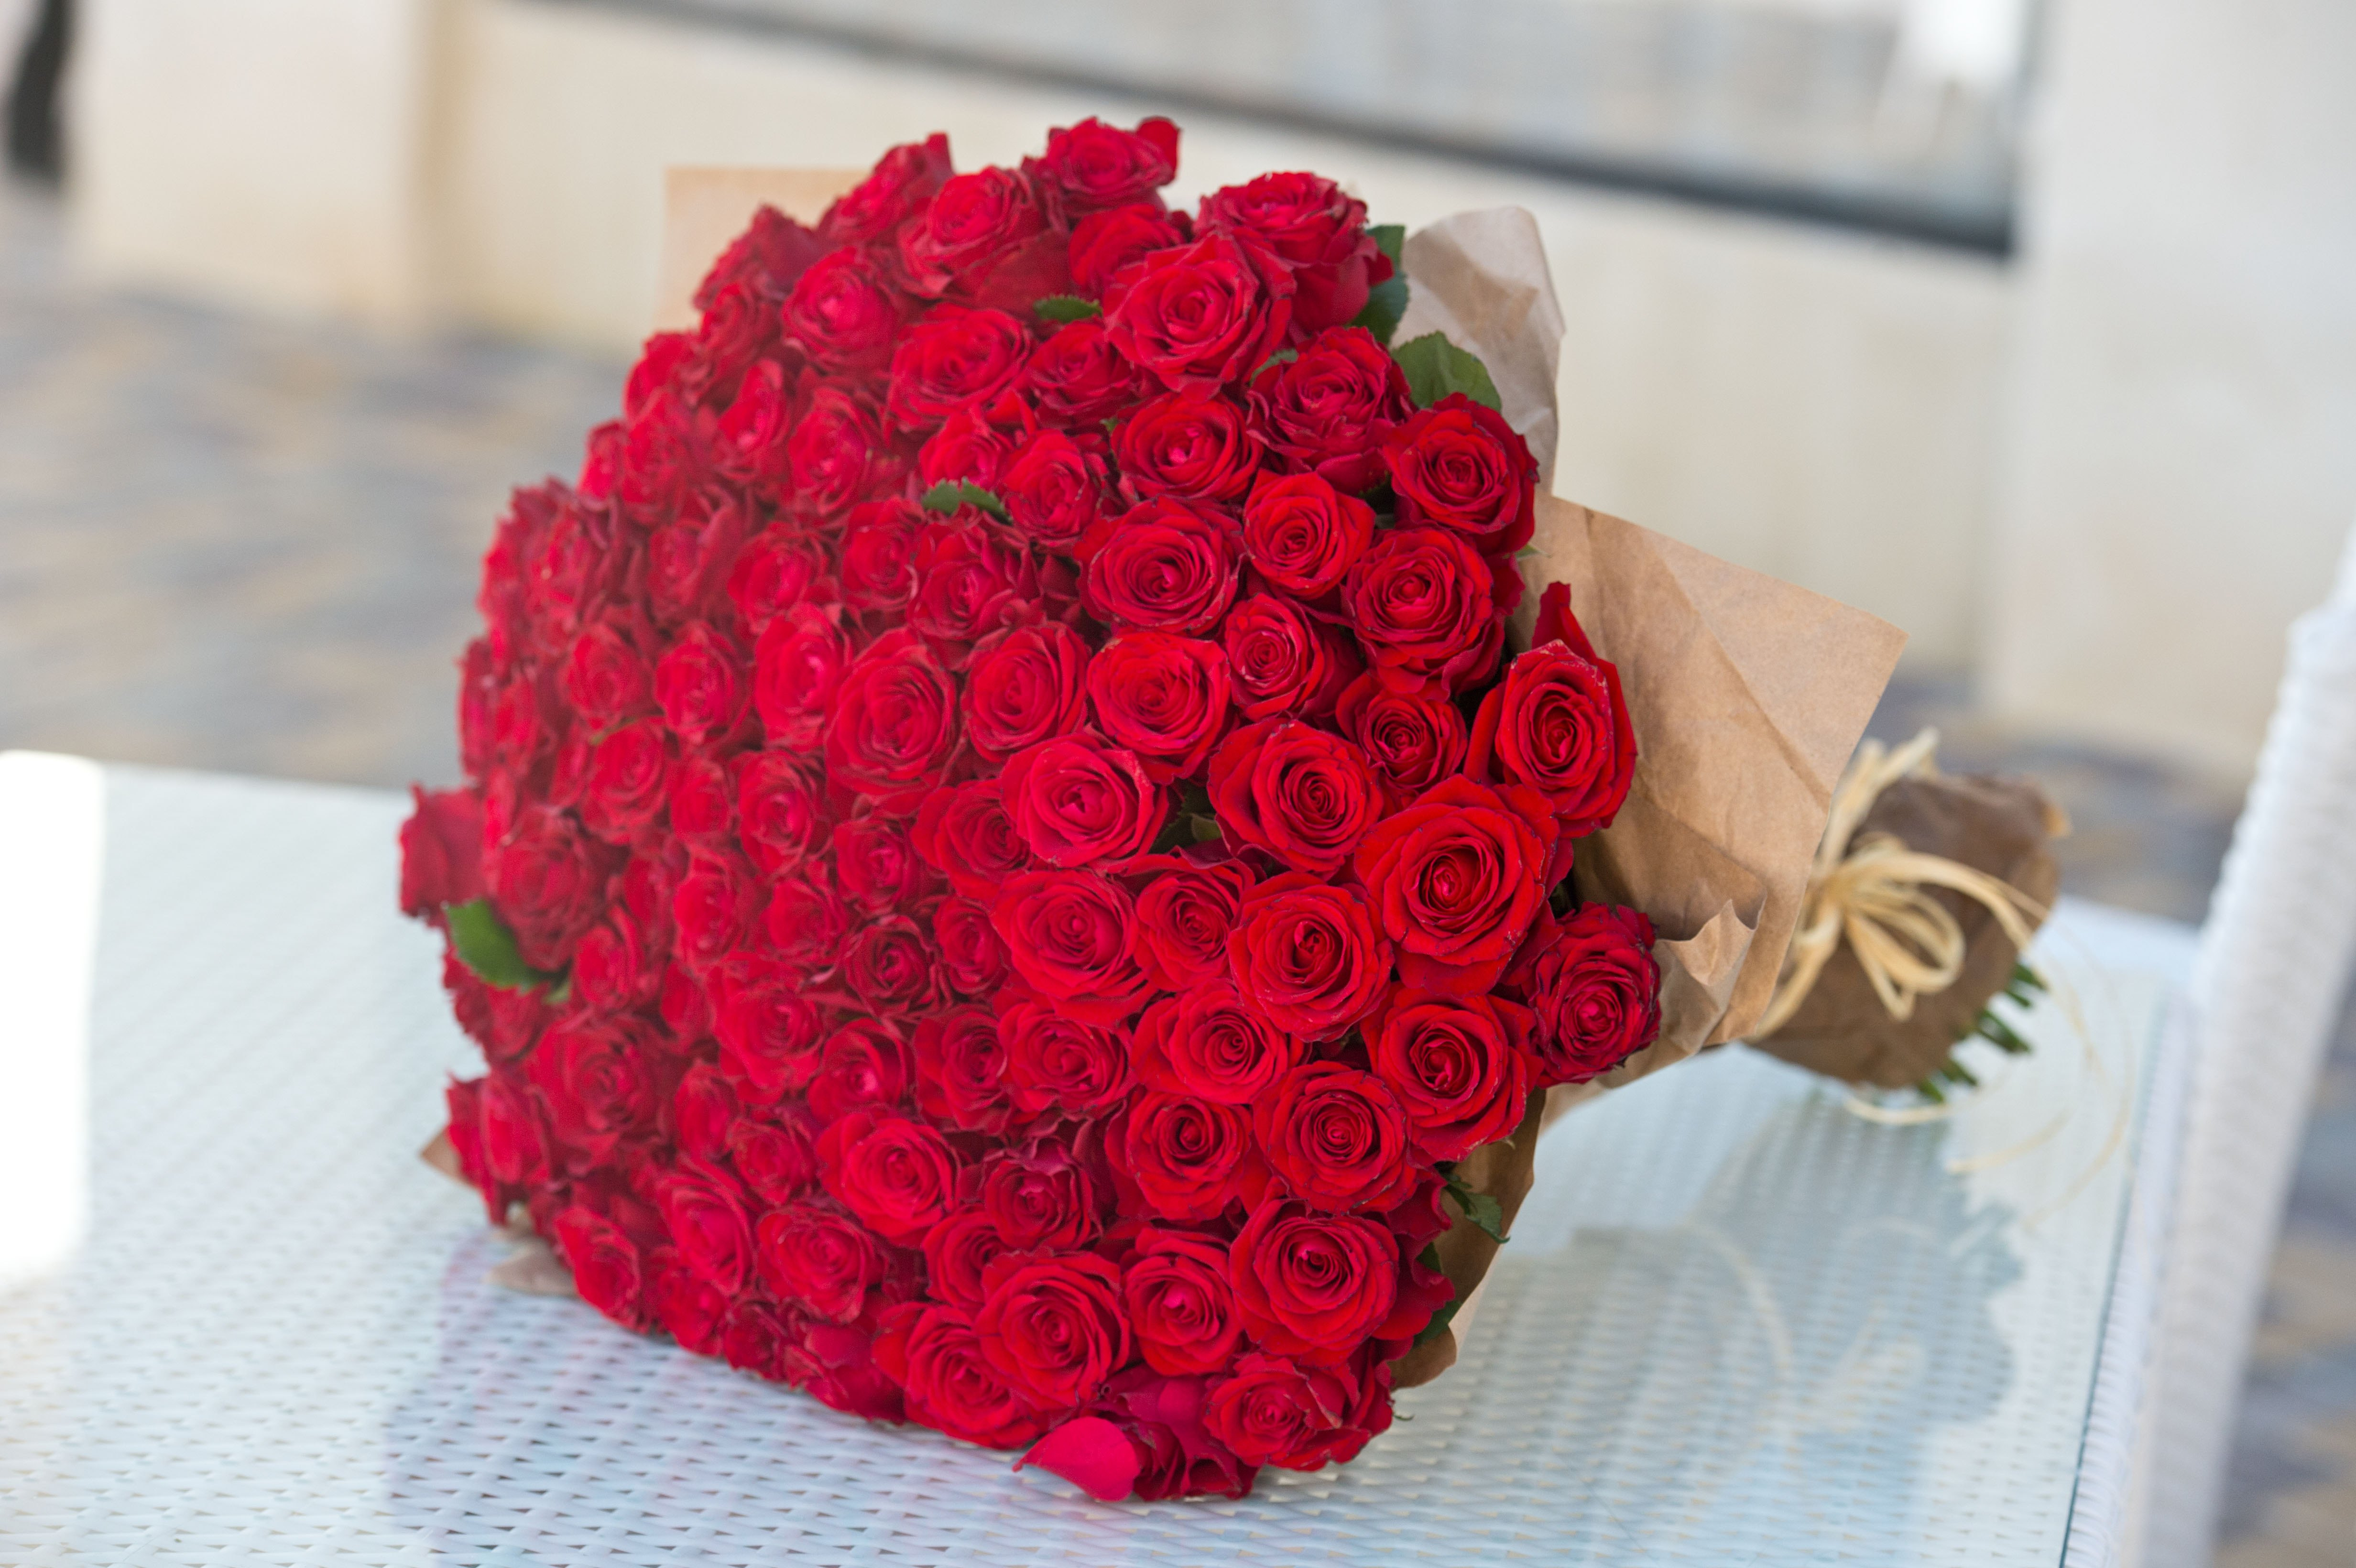 Large bouquet of 101 red rose. | Source: Shutterstock